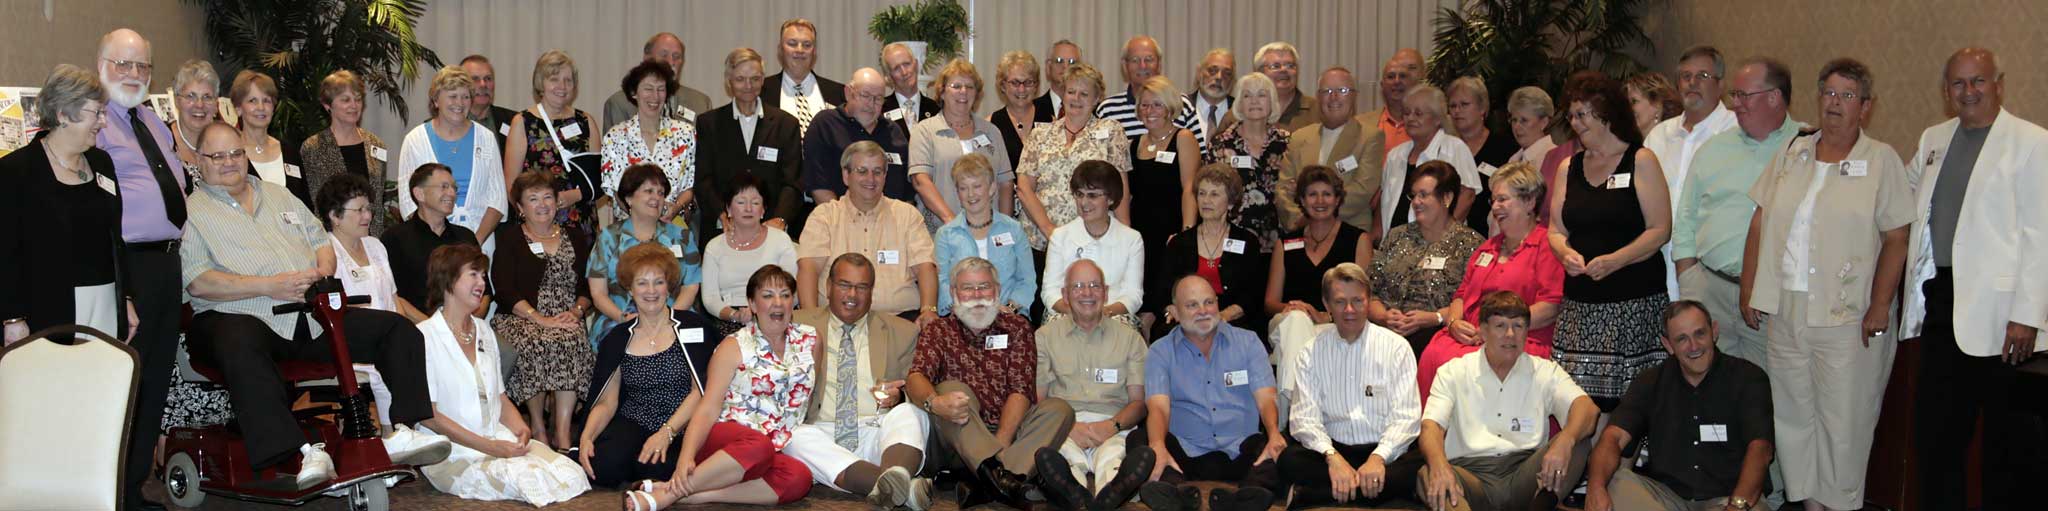 class of 1962 45 year reuion group picture